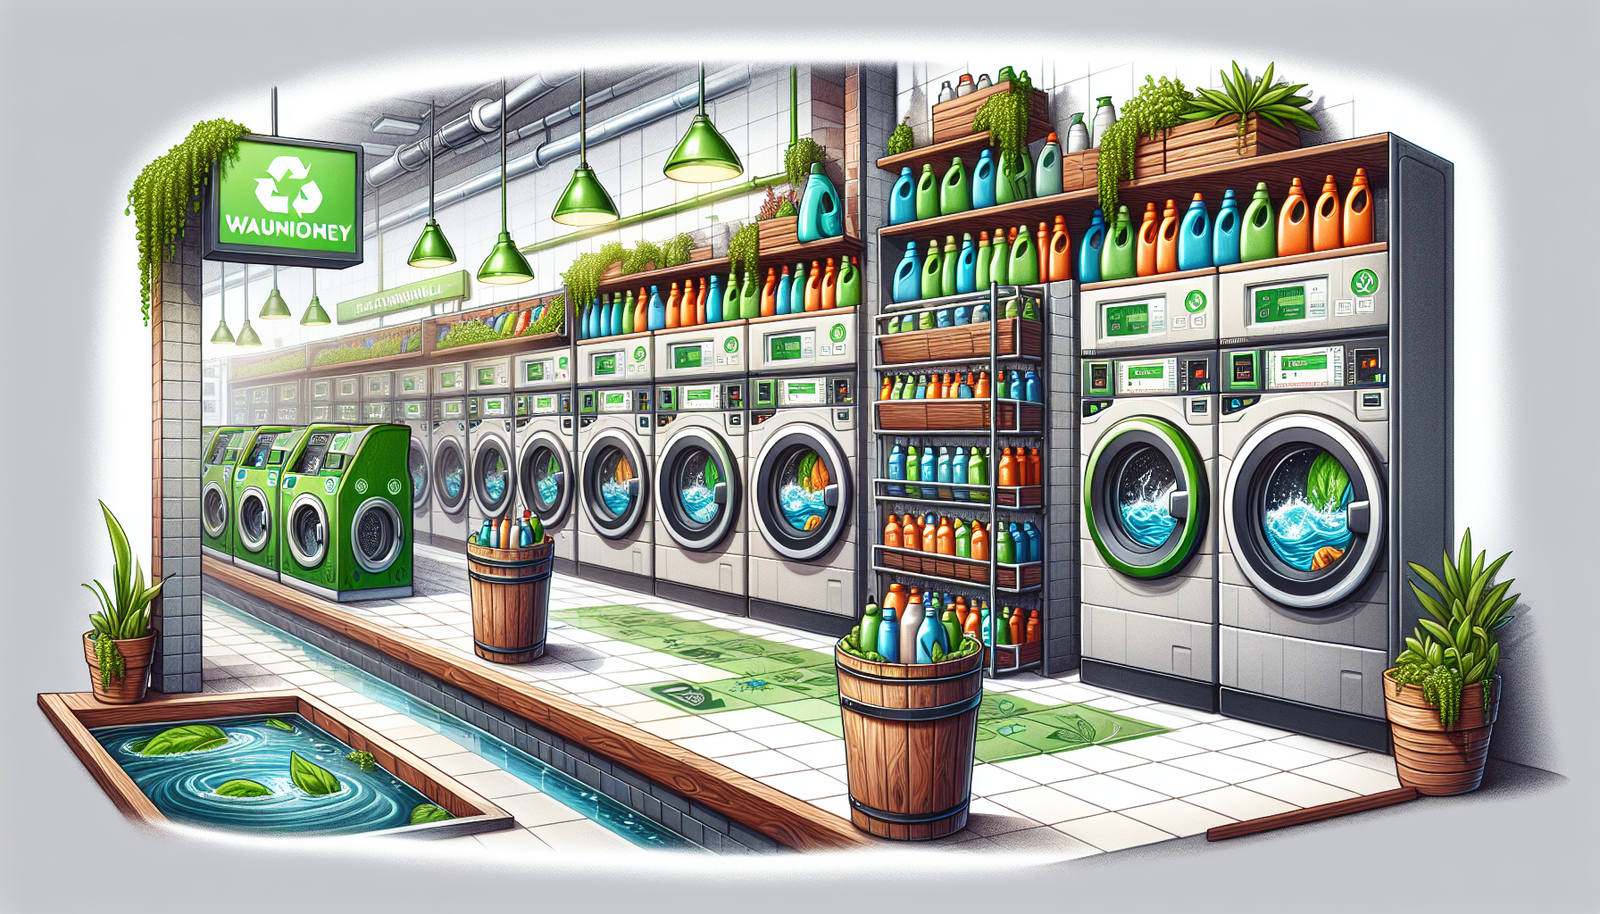 Illustration of eco-friendly practices in a laundromat